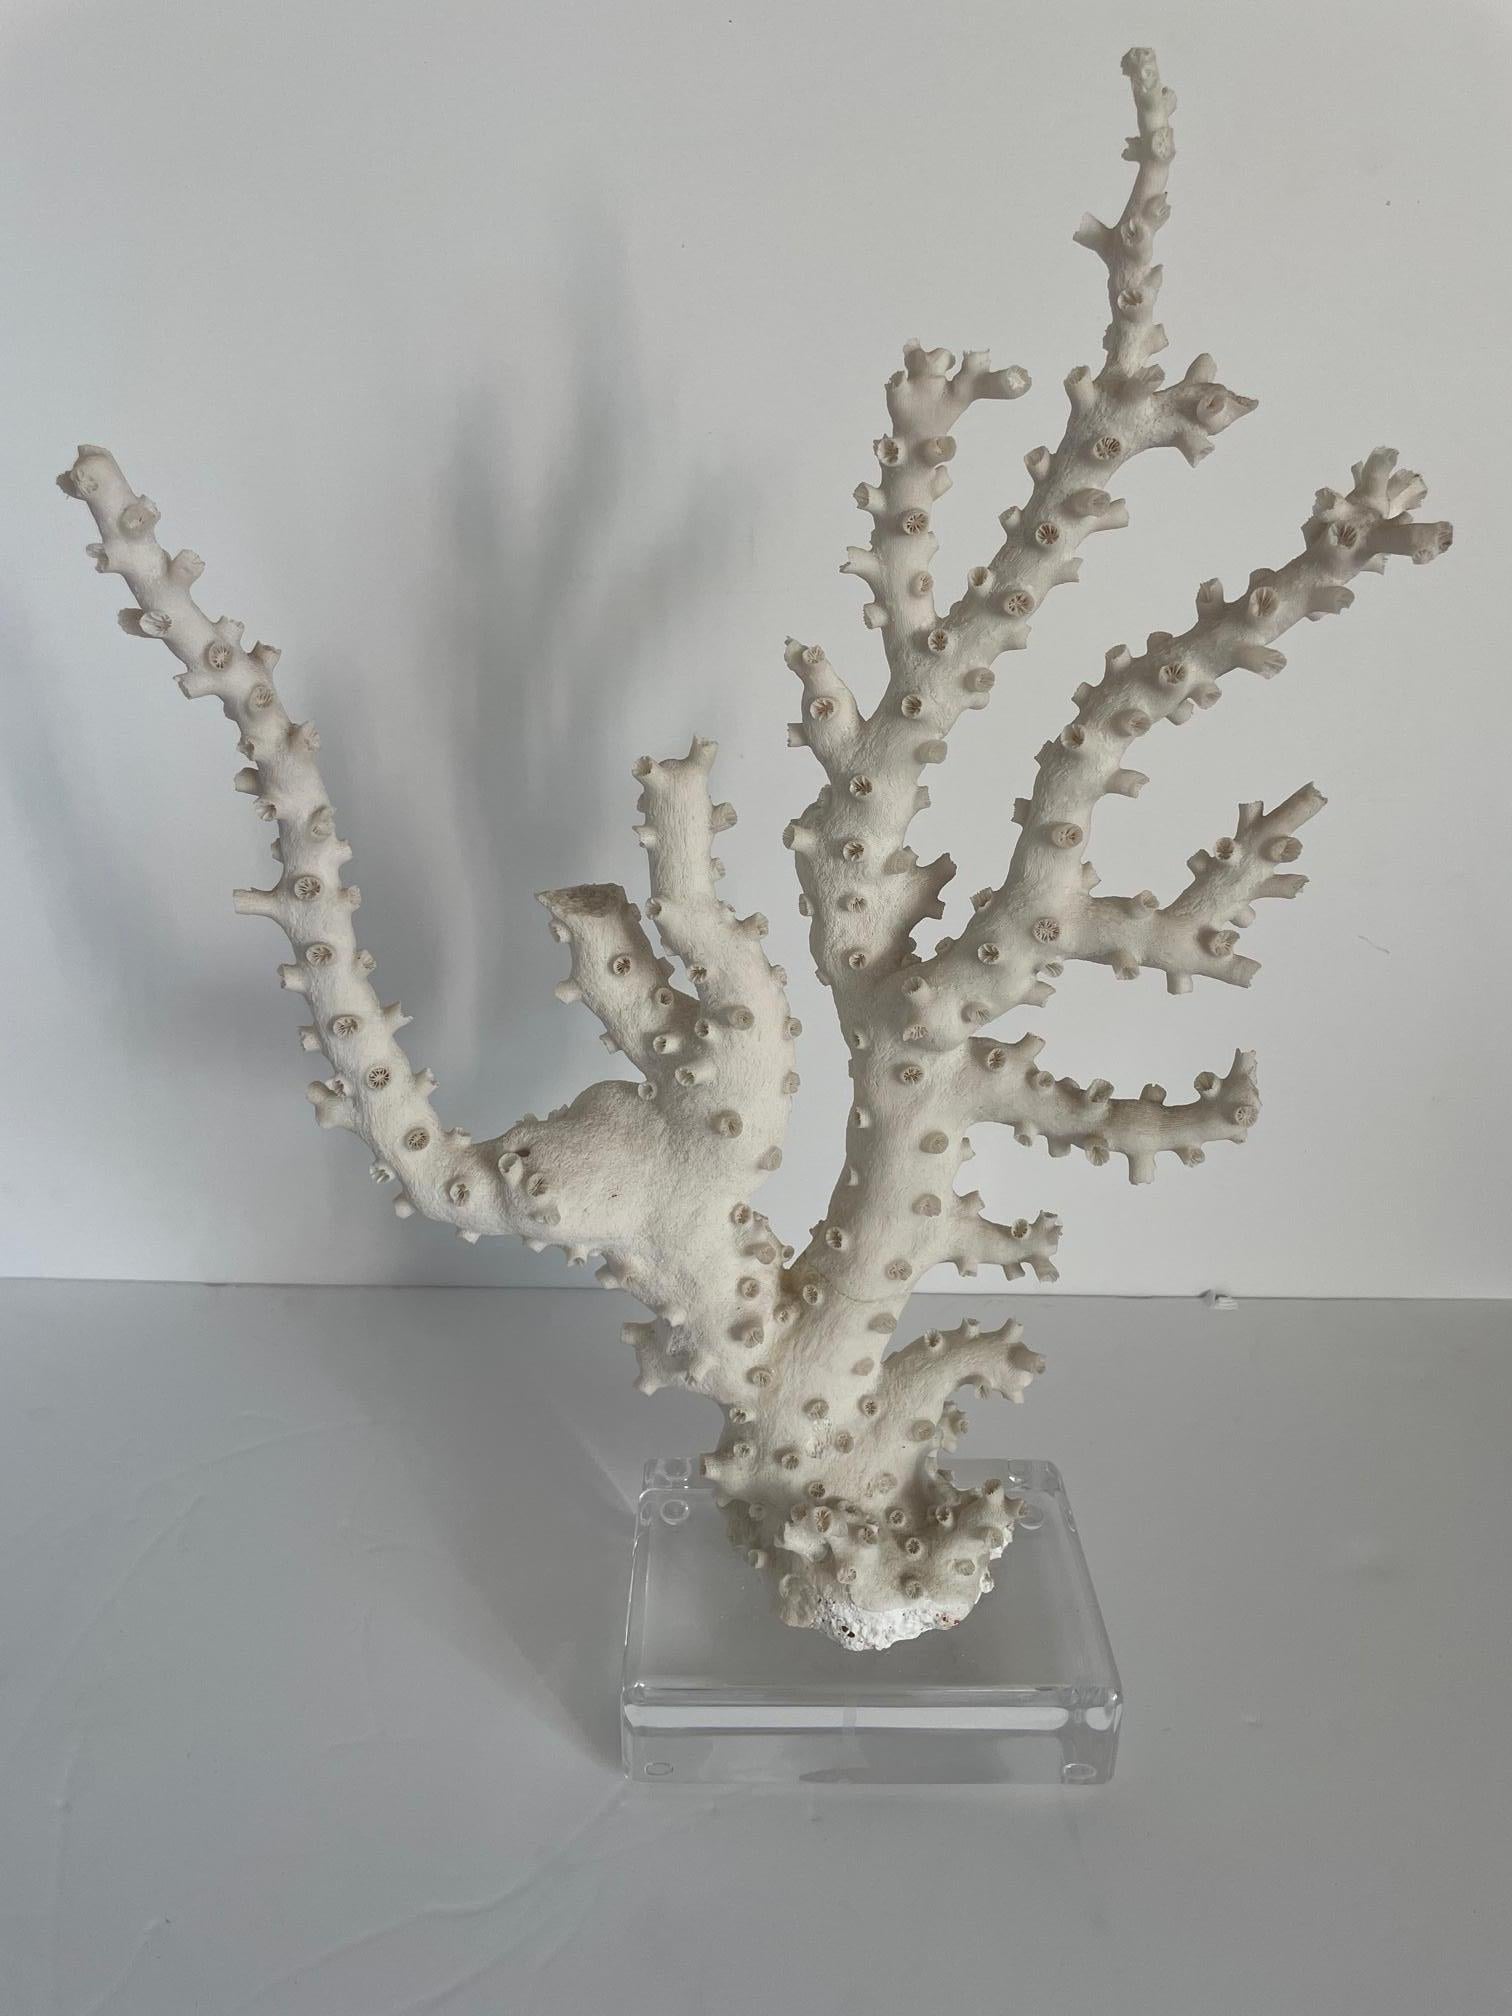 American Tall Coral Mount Sculpture For Sale